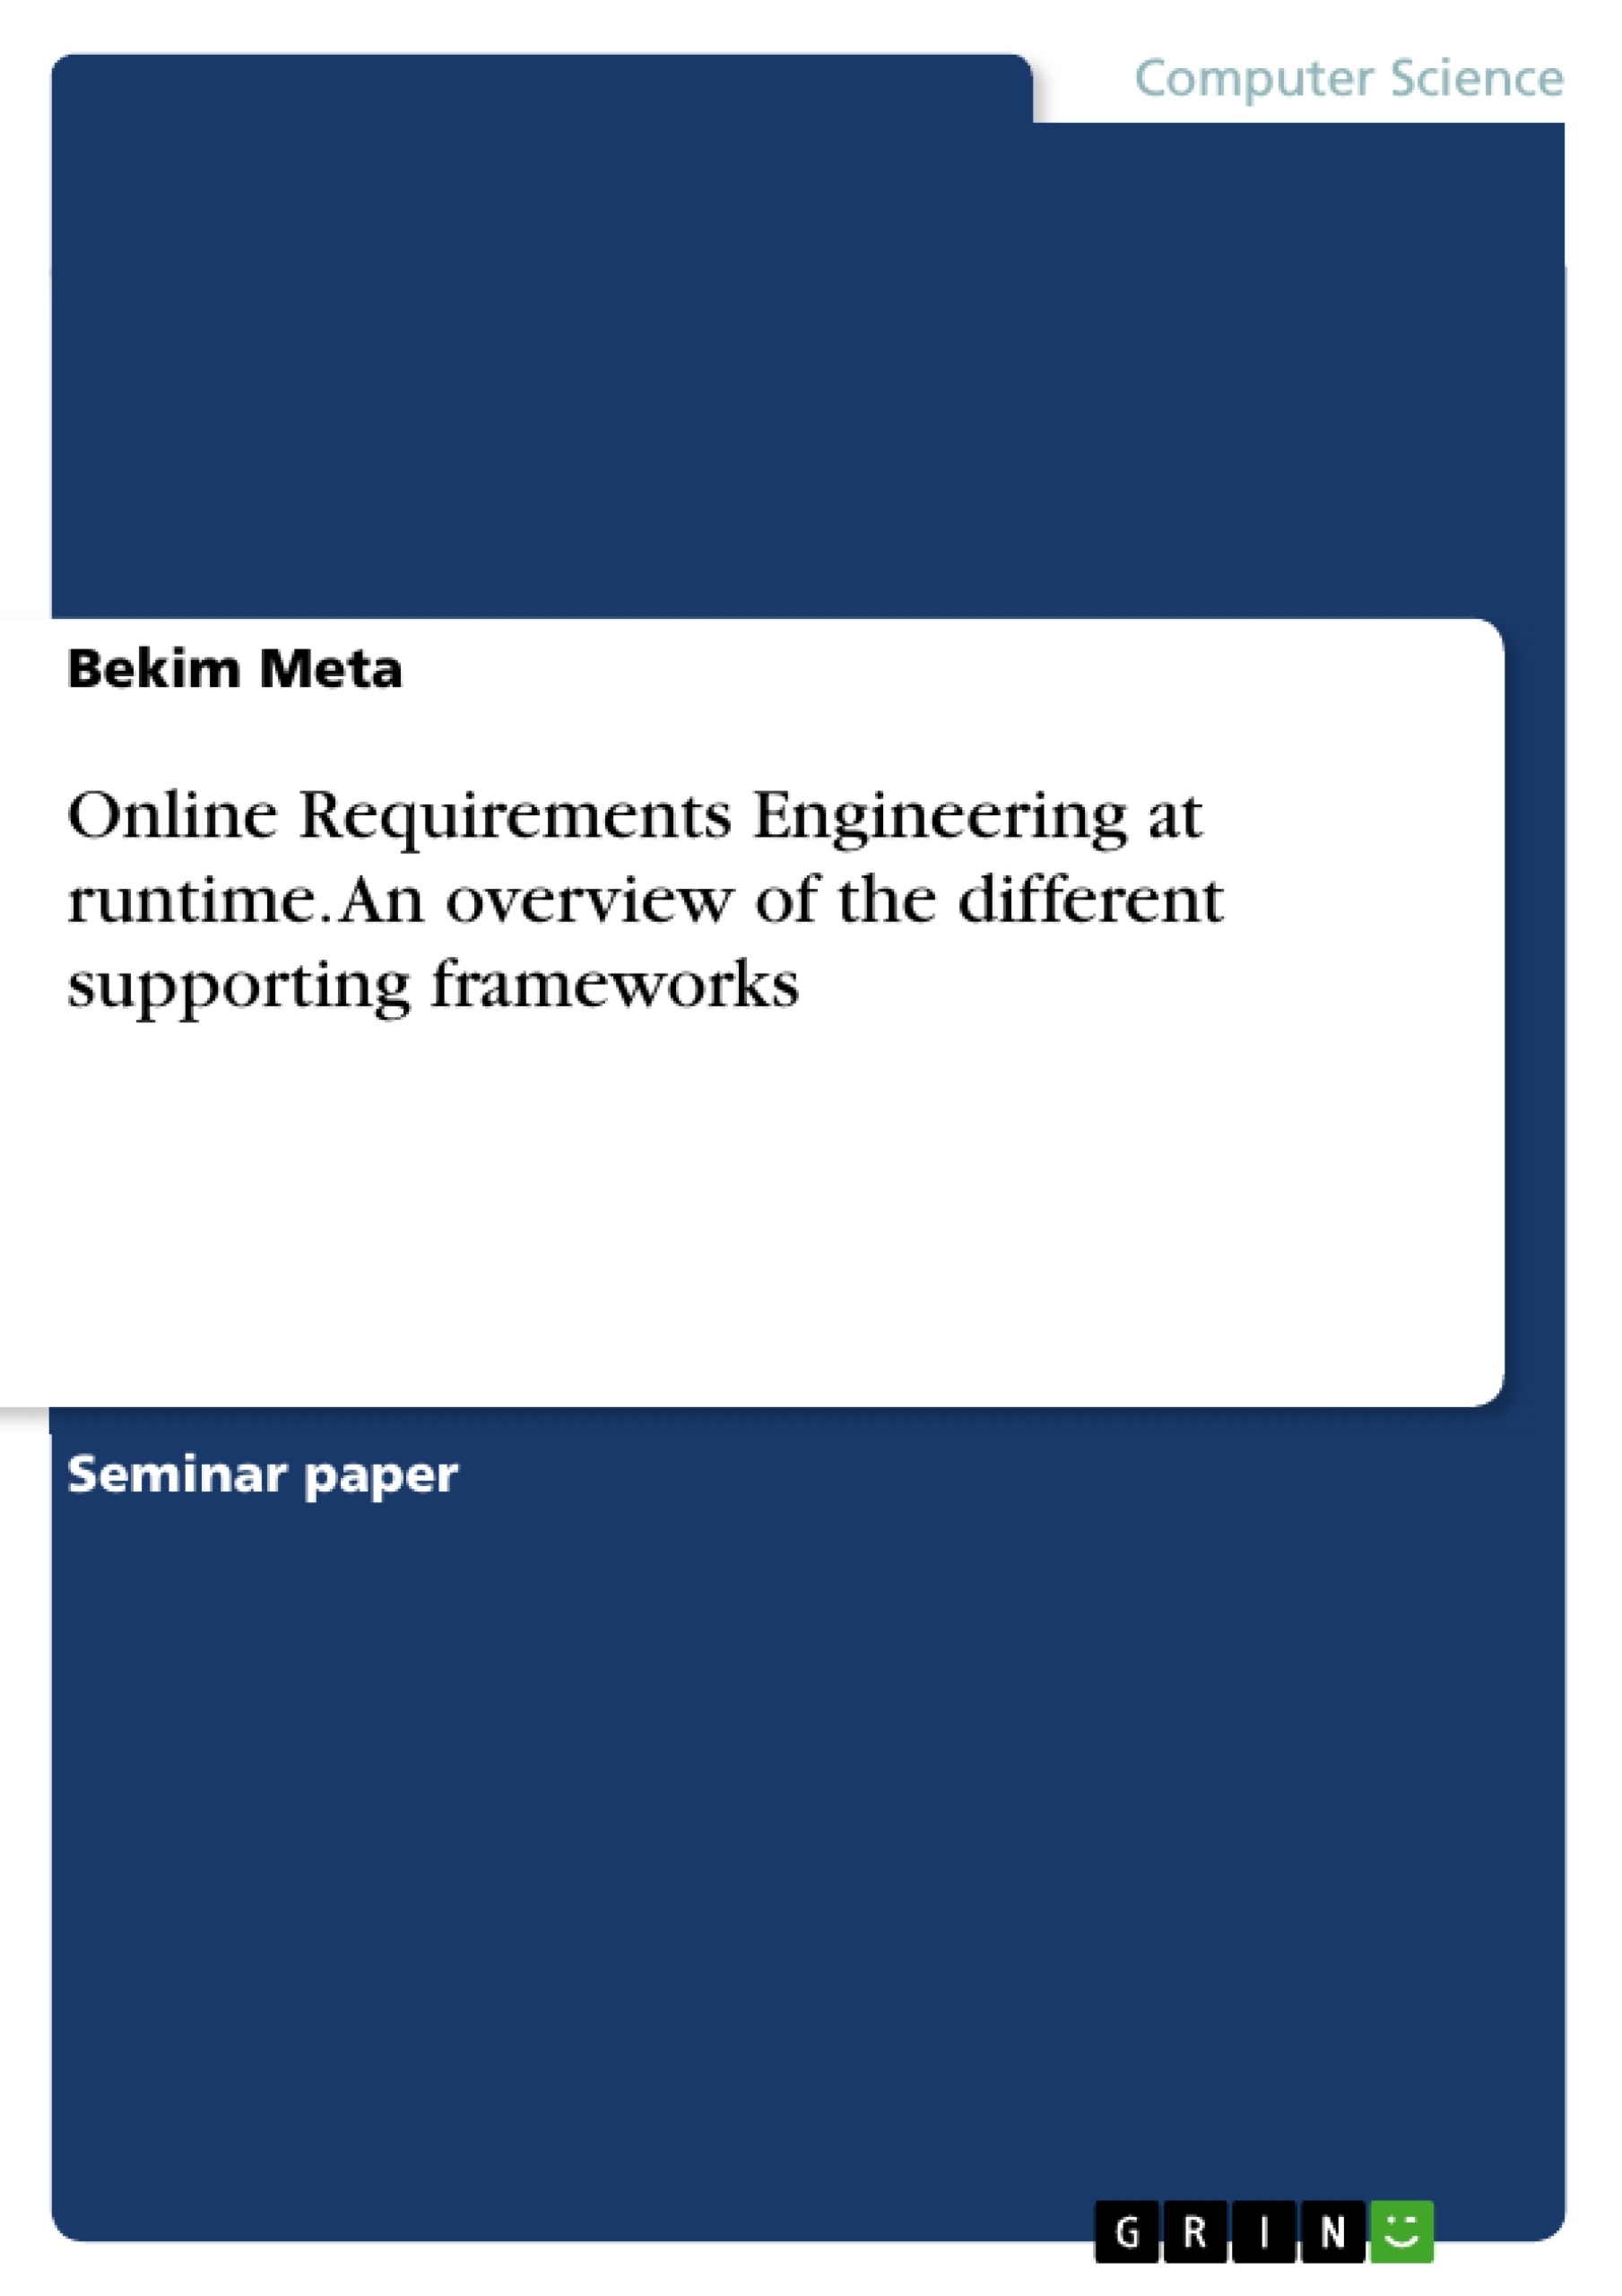 Titel: Online Requirements Engineering at runtime. An overview of the different supporting frameworks